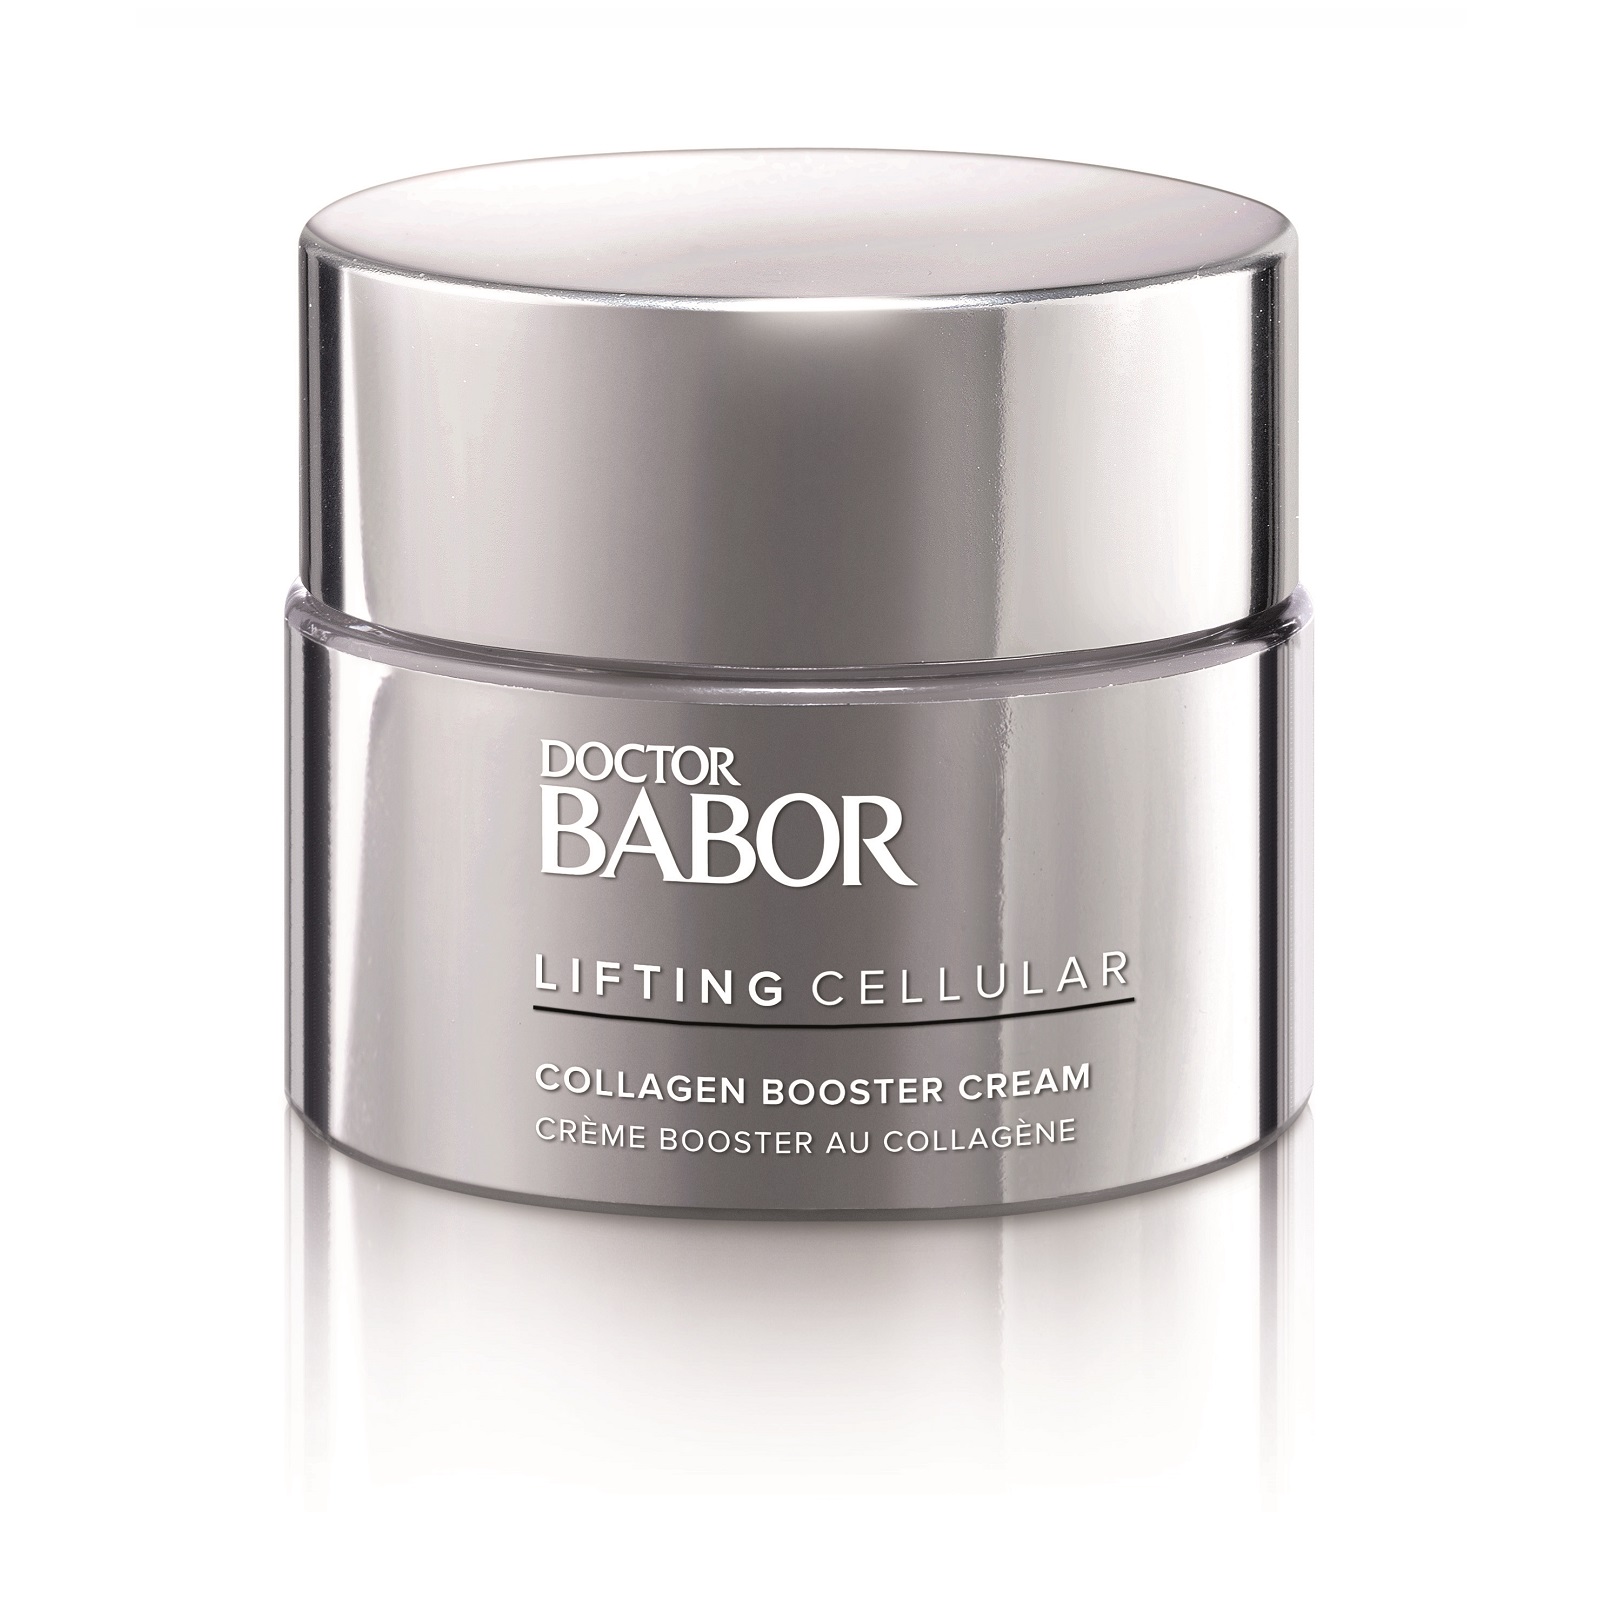 Dr. BABOR Lifting Cellular Collagen Booster Cream